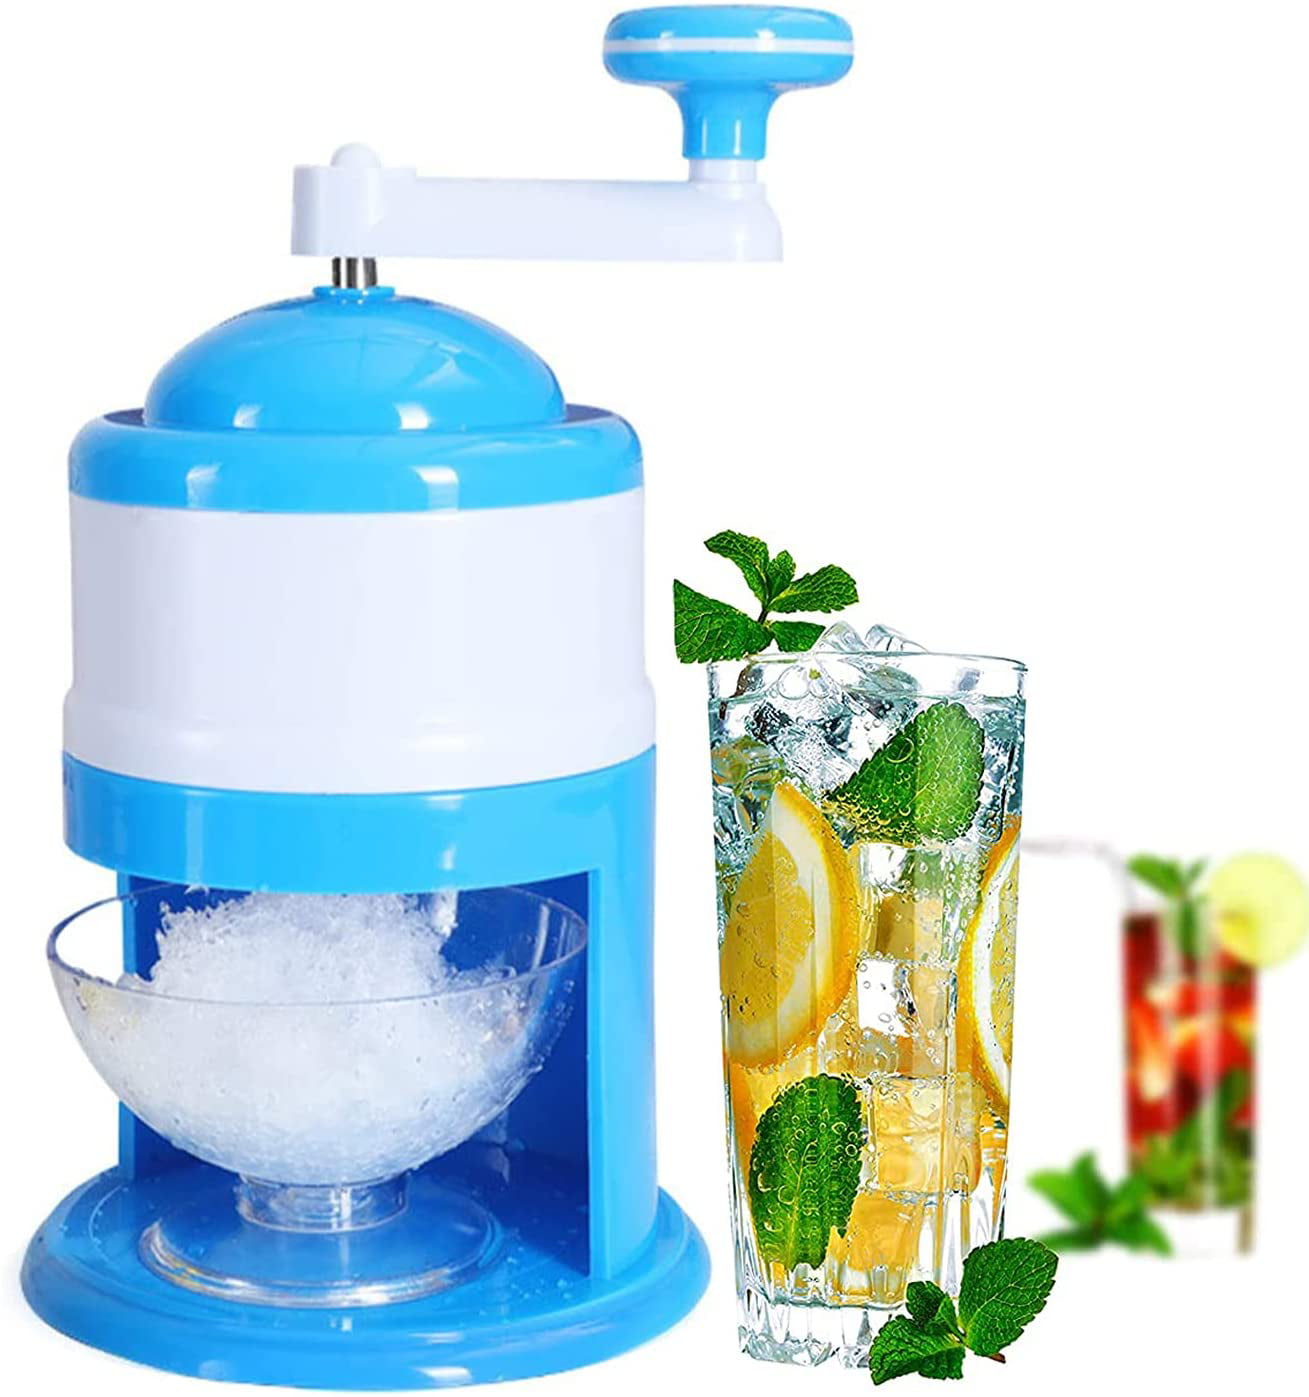 Mini Manual Ice Shaver Hand Crank Ice Crusher Machine Shaved Ice Maker for Cocktails Drinks Desserts 